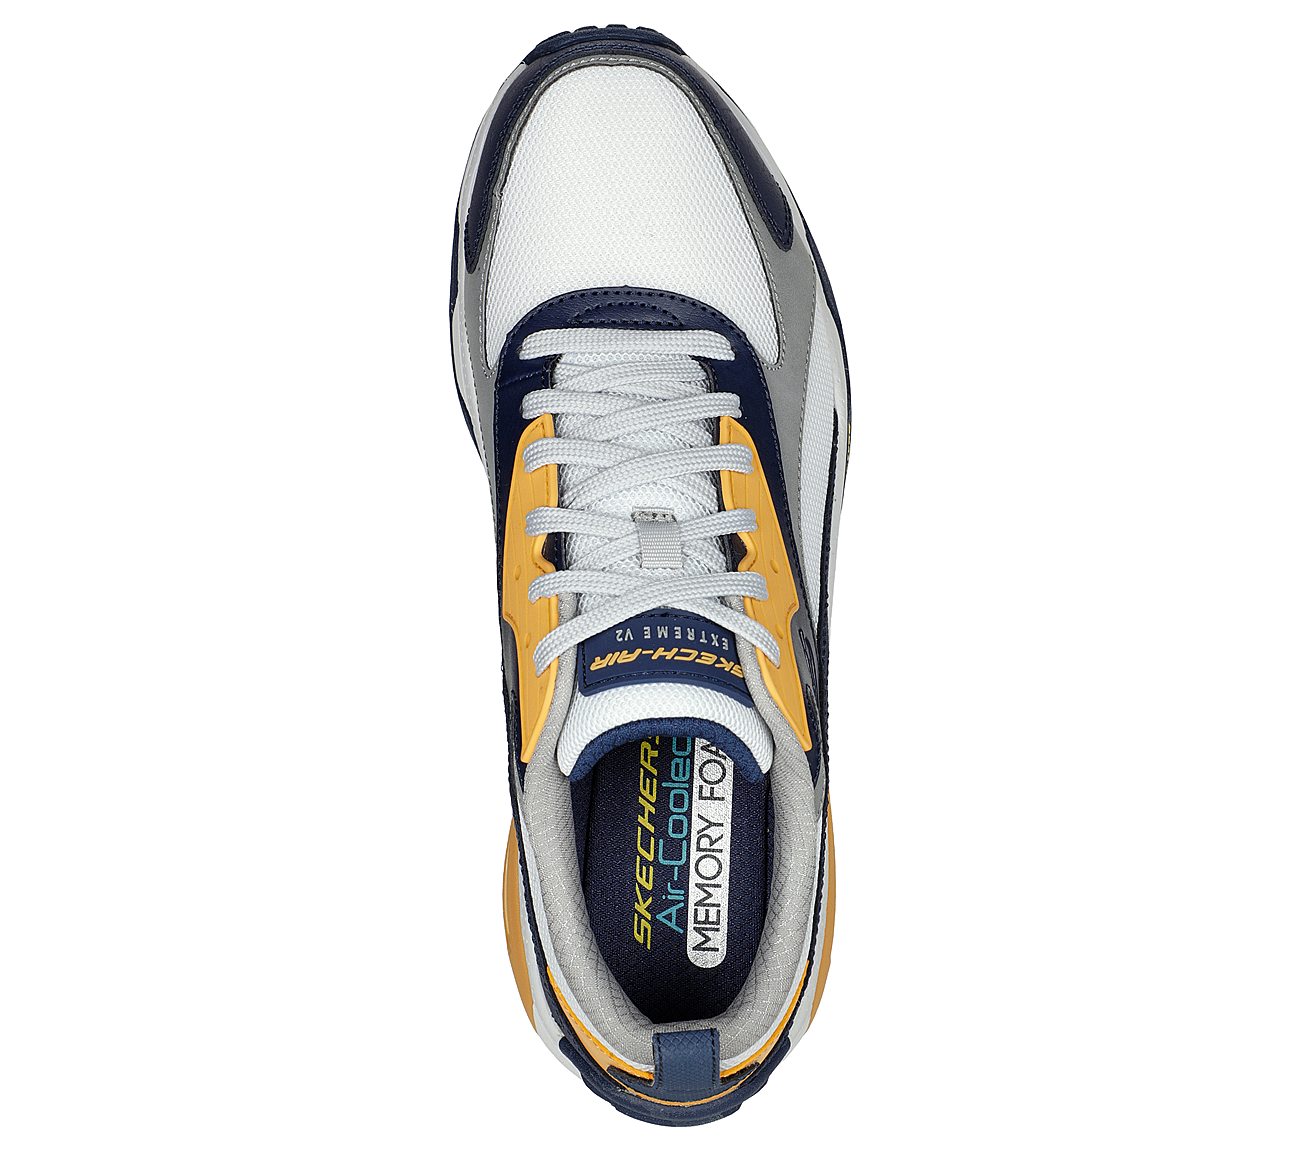 SKECH-AIR EXTREME V2, NAVY/WHITE Footwear Top View